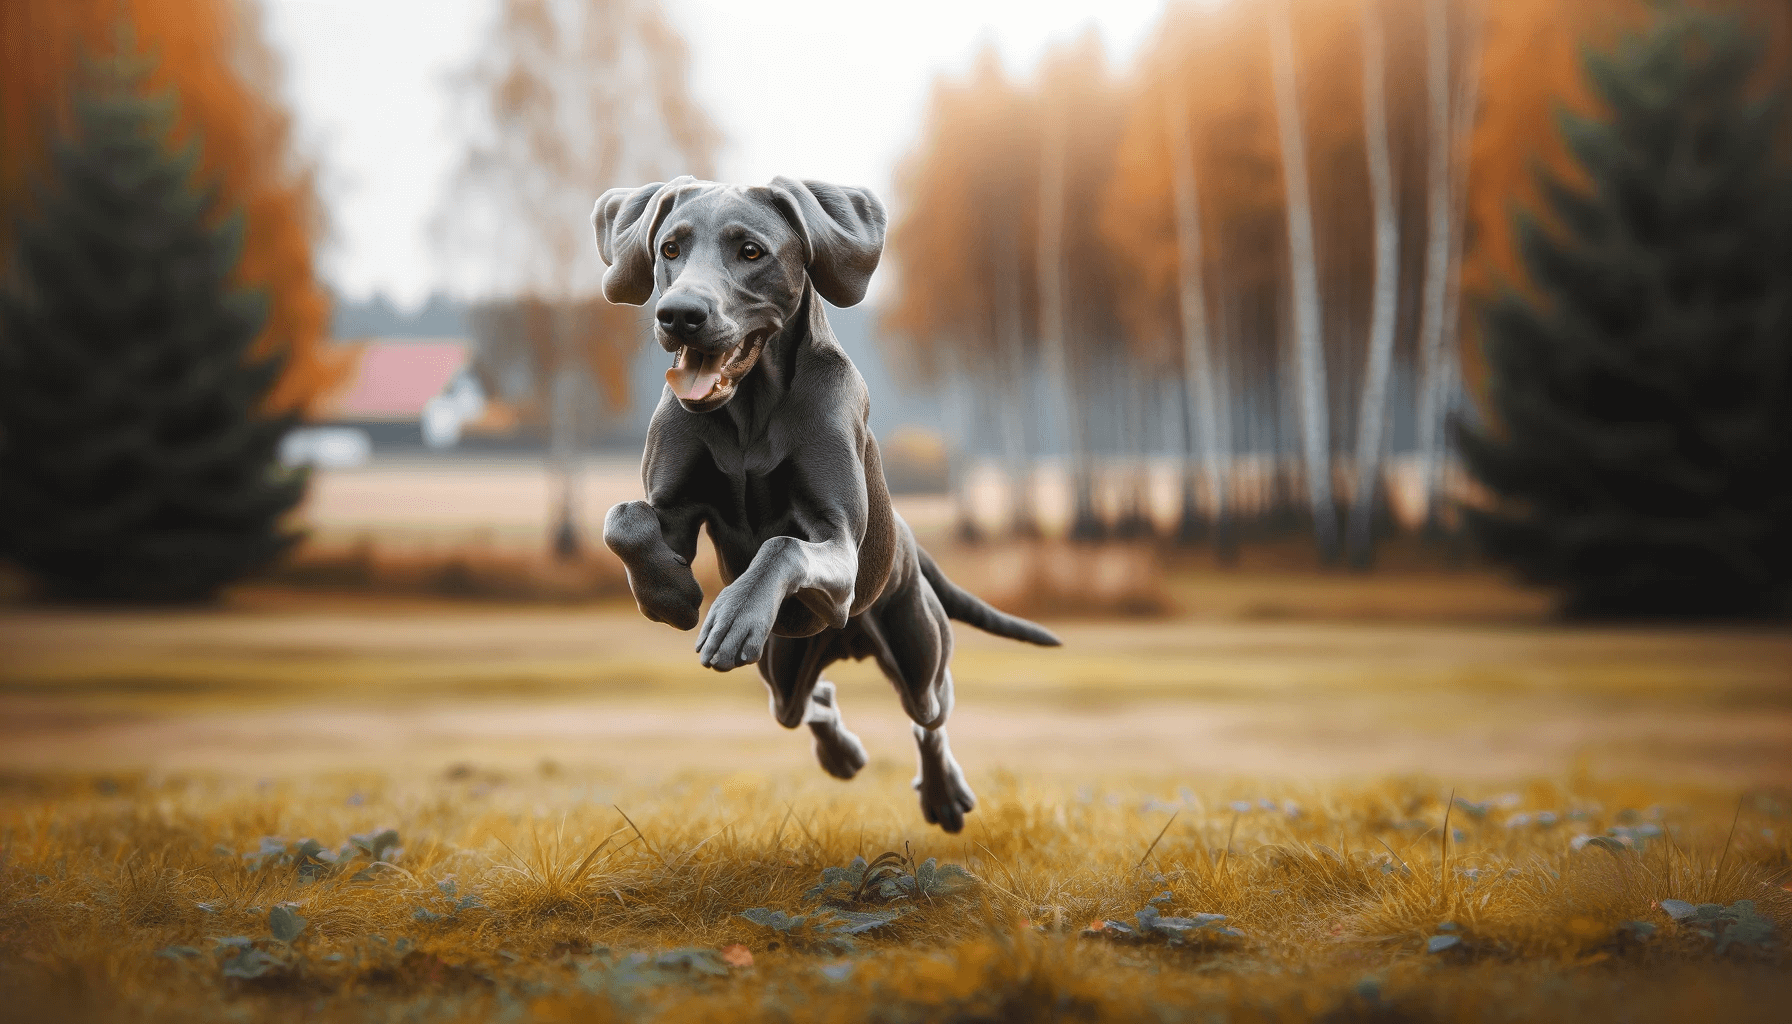 Greyador_s_agility_and_athleticism_while_playing_fetch_showcasing_its_energetic_and_playful_spirit_in_an_outdoor_setting